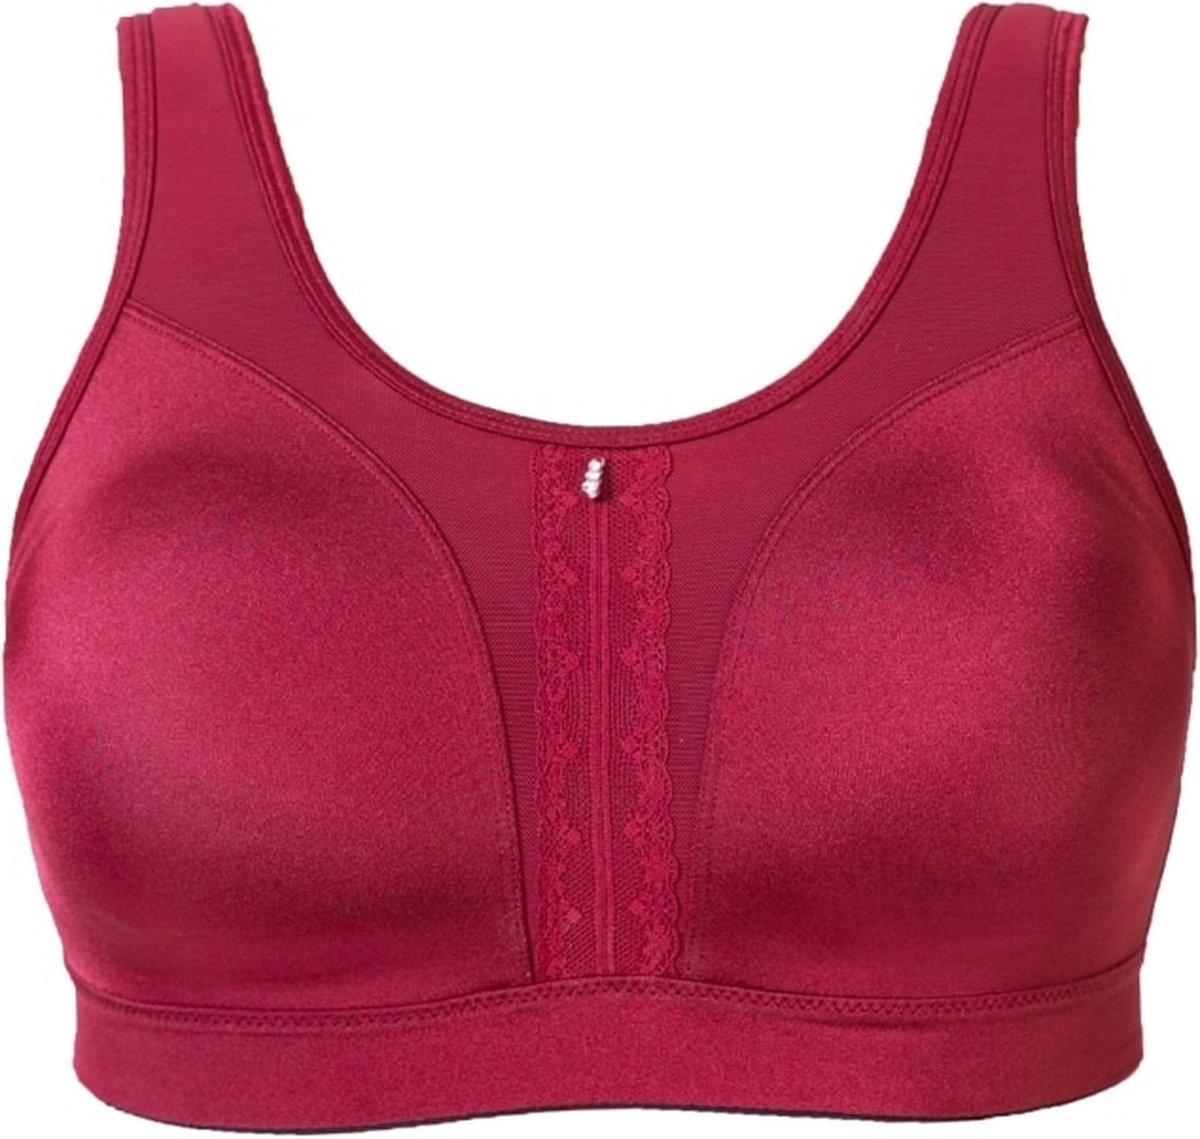 High impact Sport BH (zonder beugel) Cannes, Deep Red / Bordeaux rood, maat: 70C